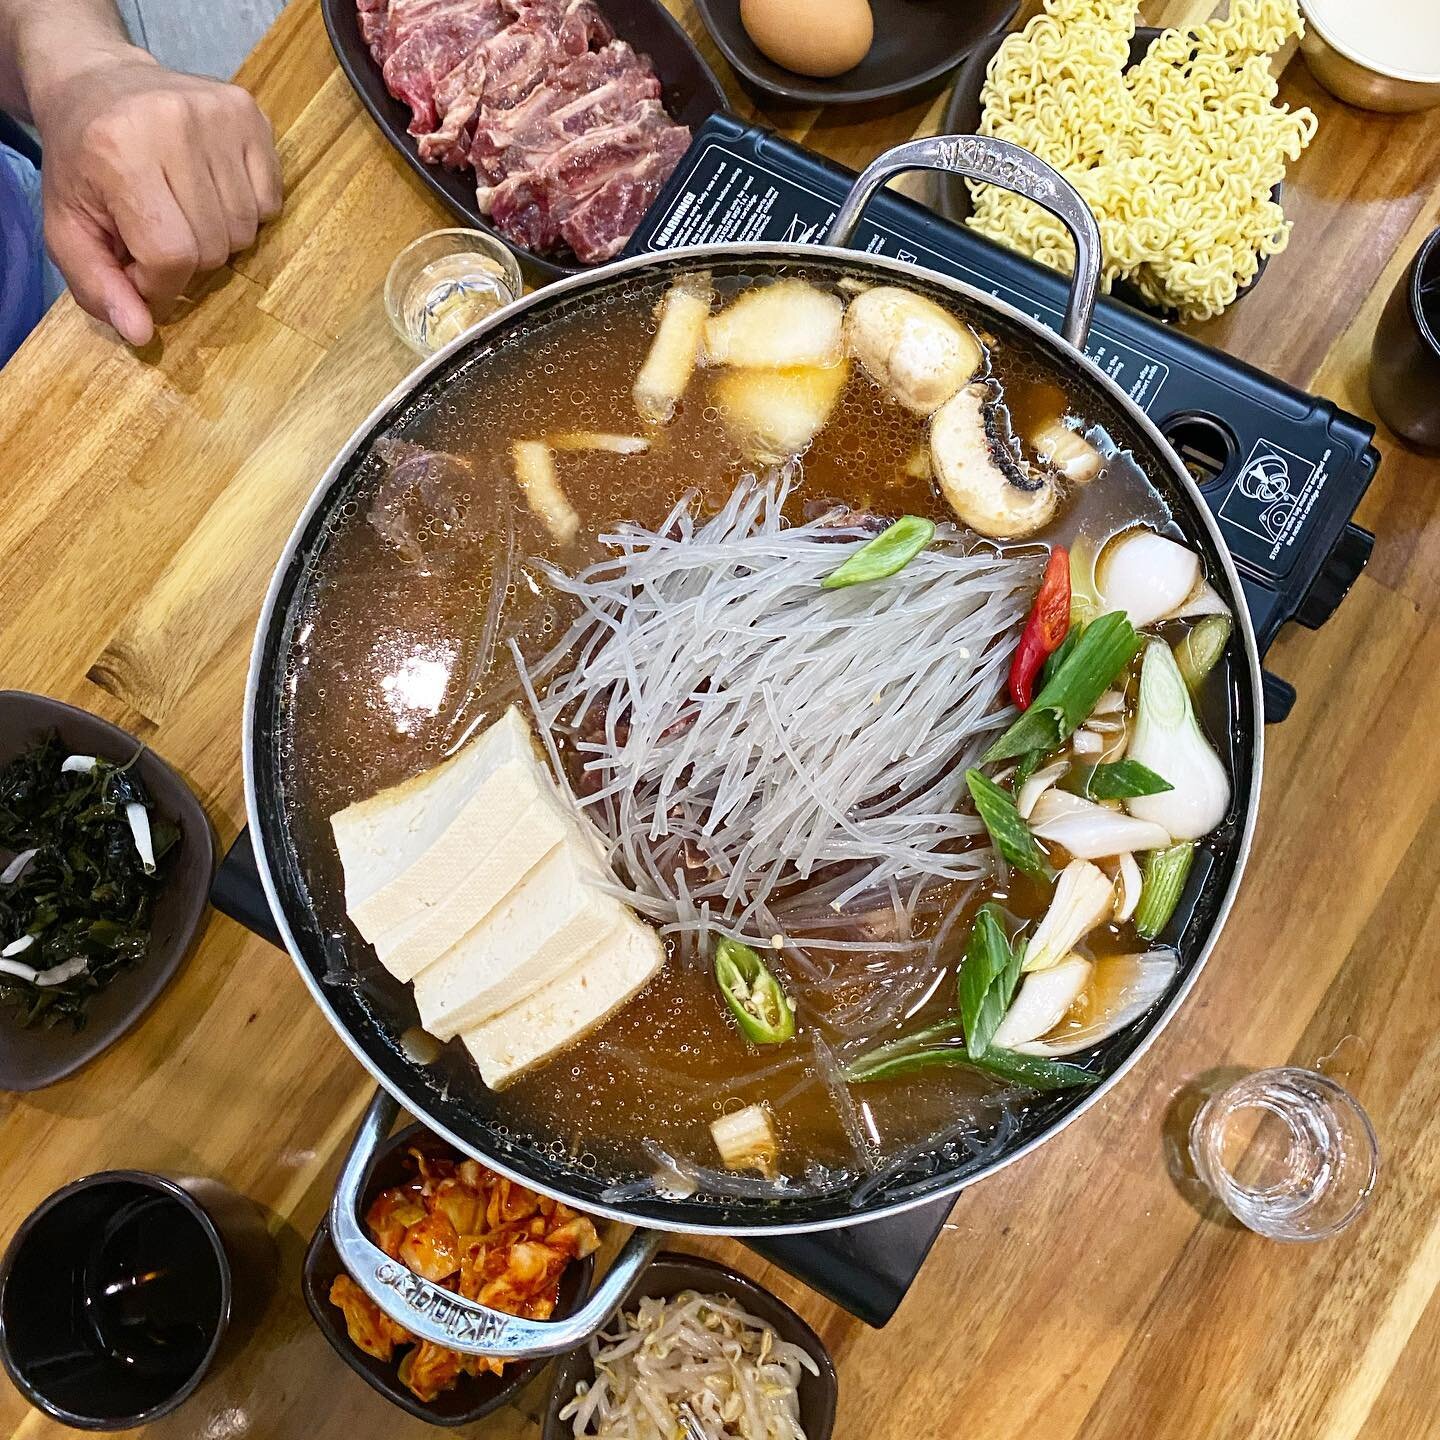 Forget hot girl summer. 
Hot pot autumn is here. 
🍂🍲
#deliciousness #koreanfood #thisislondon